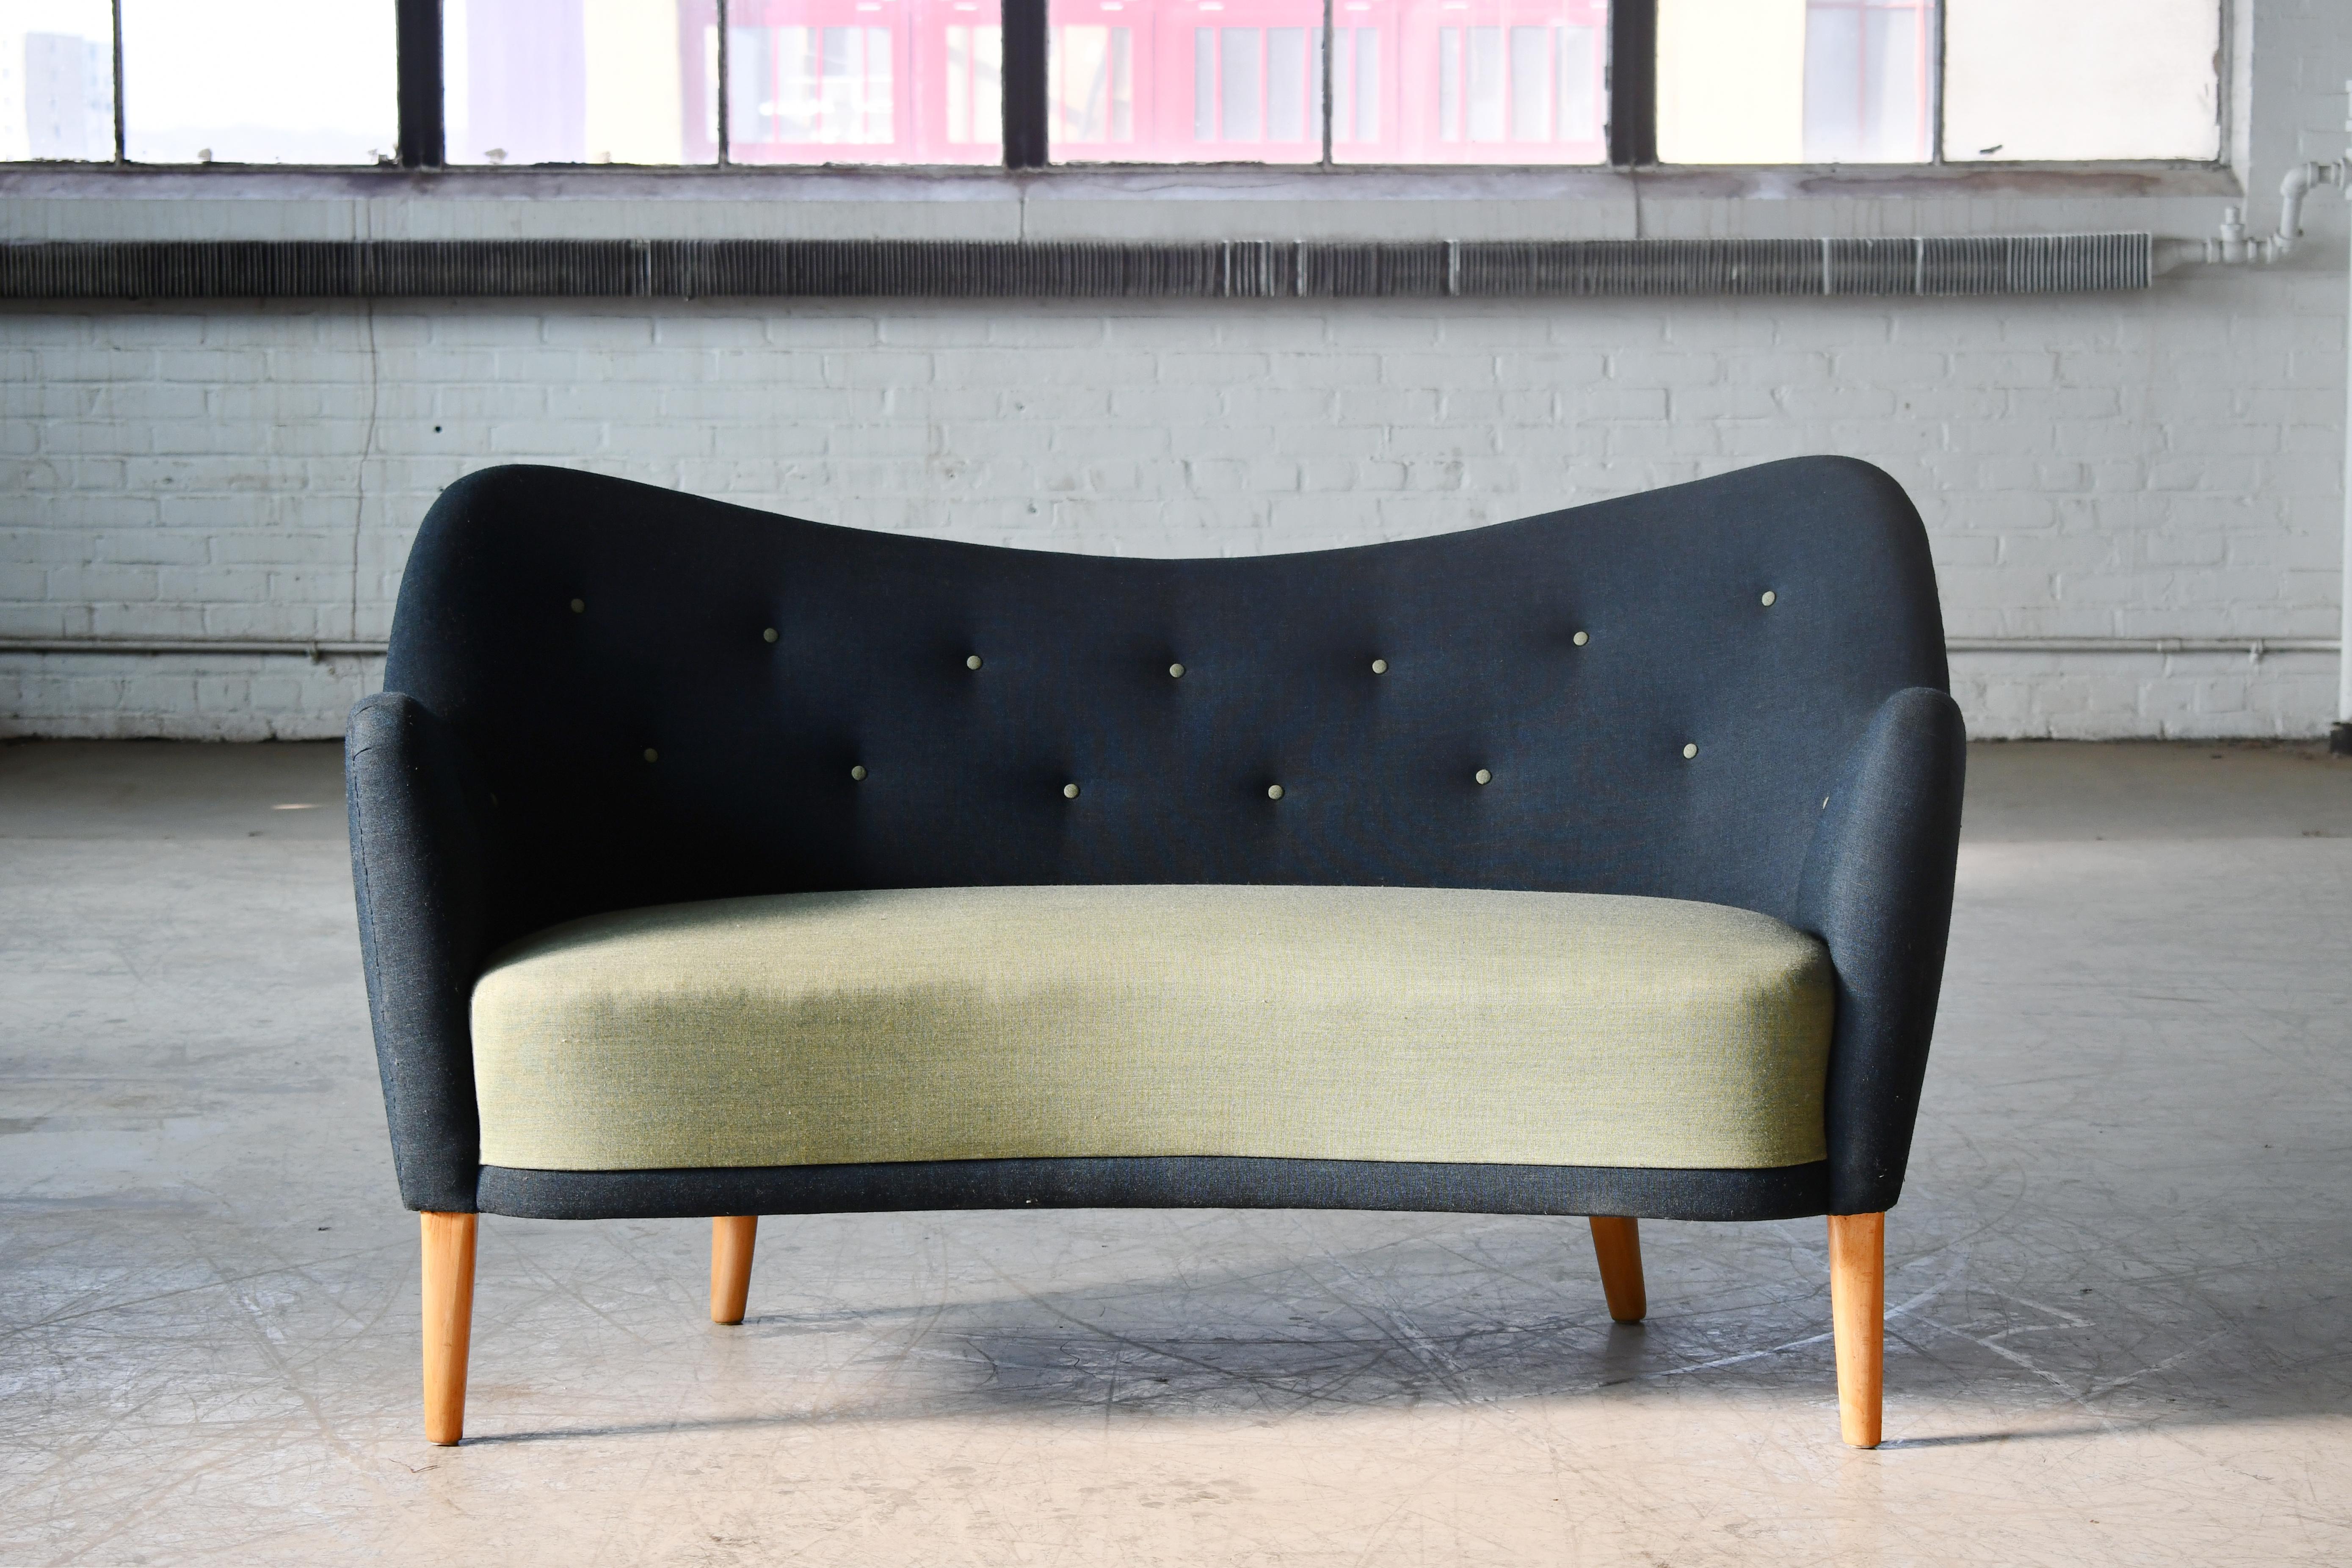 Superbly elegant Finn Juhl attributed sofa or settee made by Slagelse Mobelvaerk, Denmark sometime in the 1940s as model number 185. The lines and proportions of this design are just perfection. Solid and sturdy raised on beech legs. The fabric was